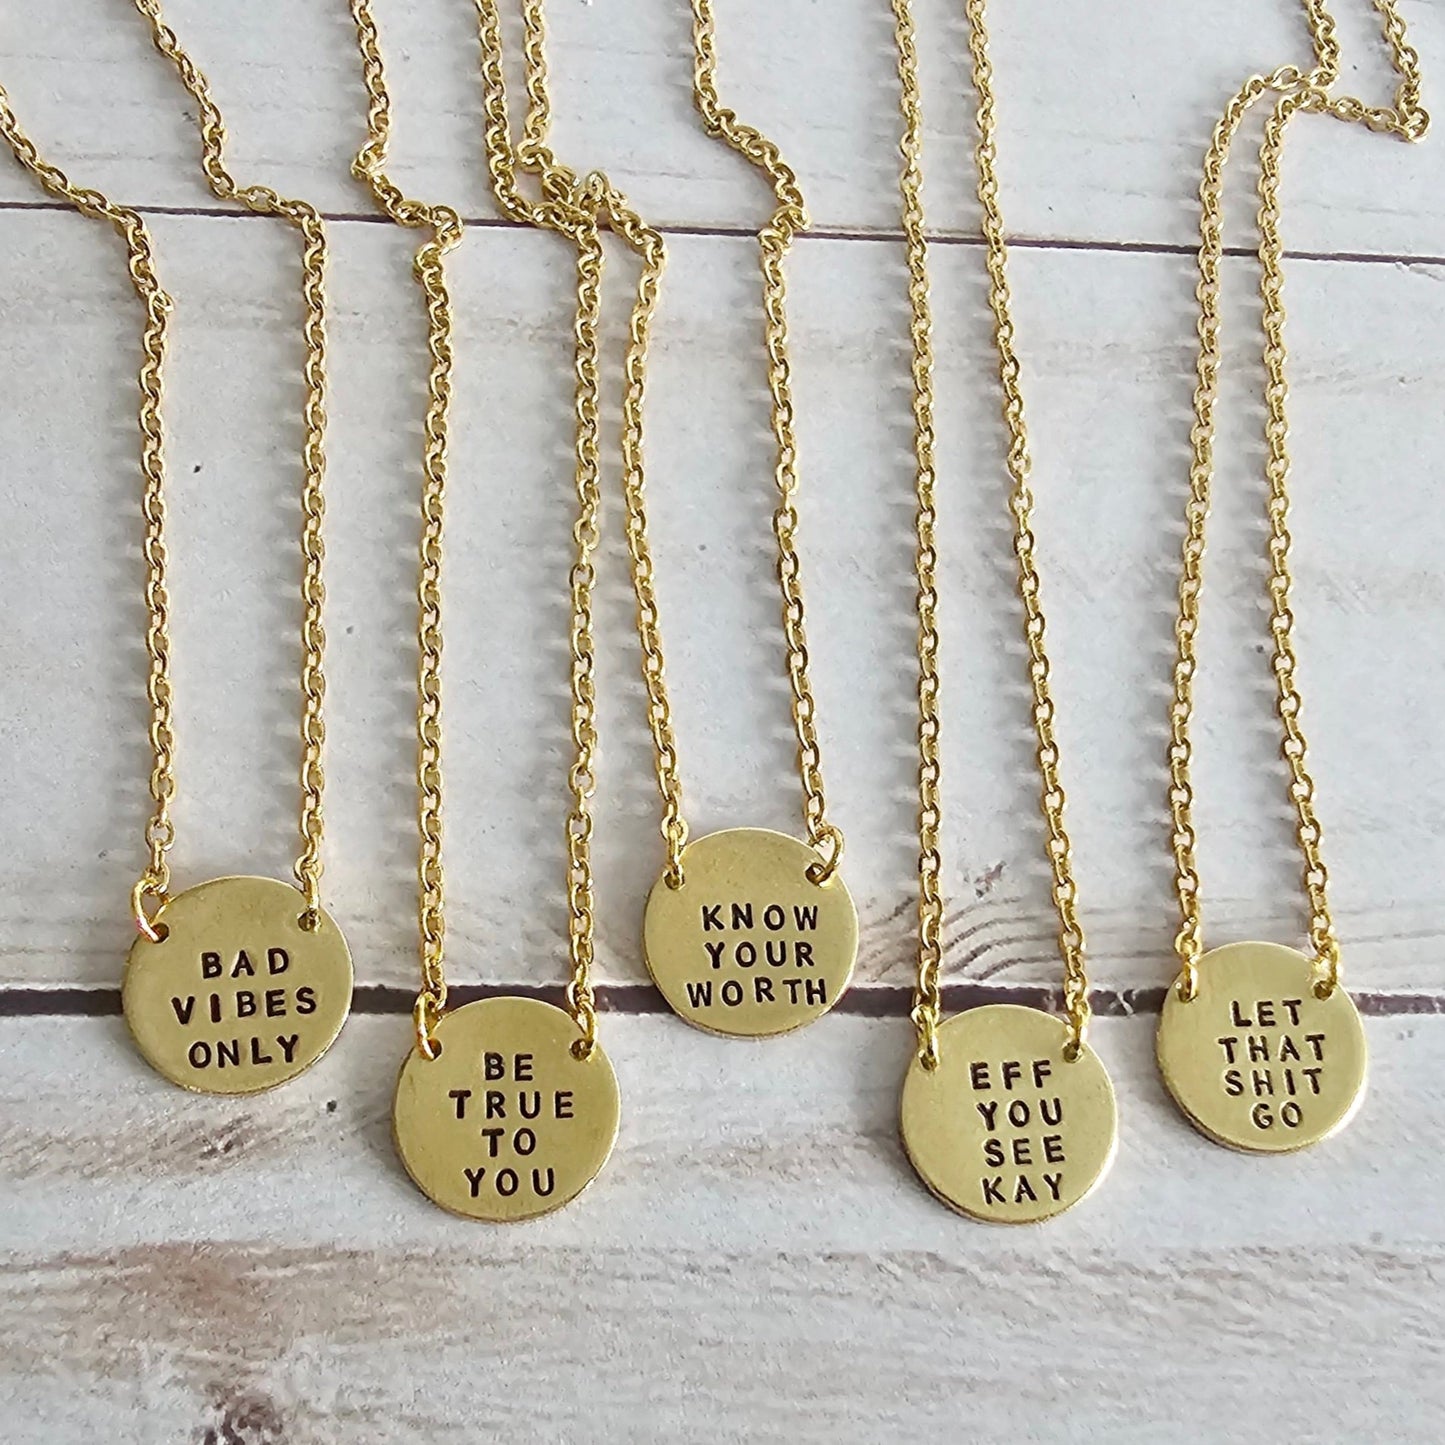 Tiny Brass Disc neckaces hand stamped with positive and funny quotes